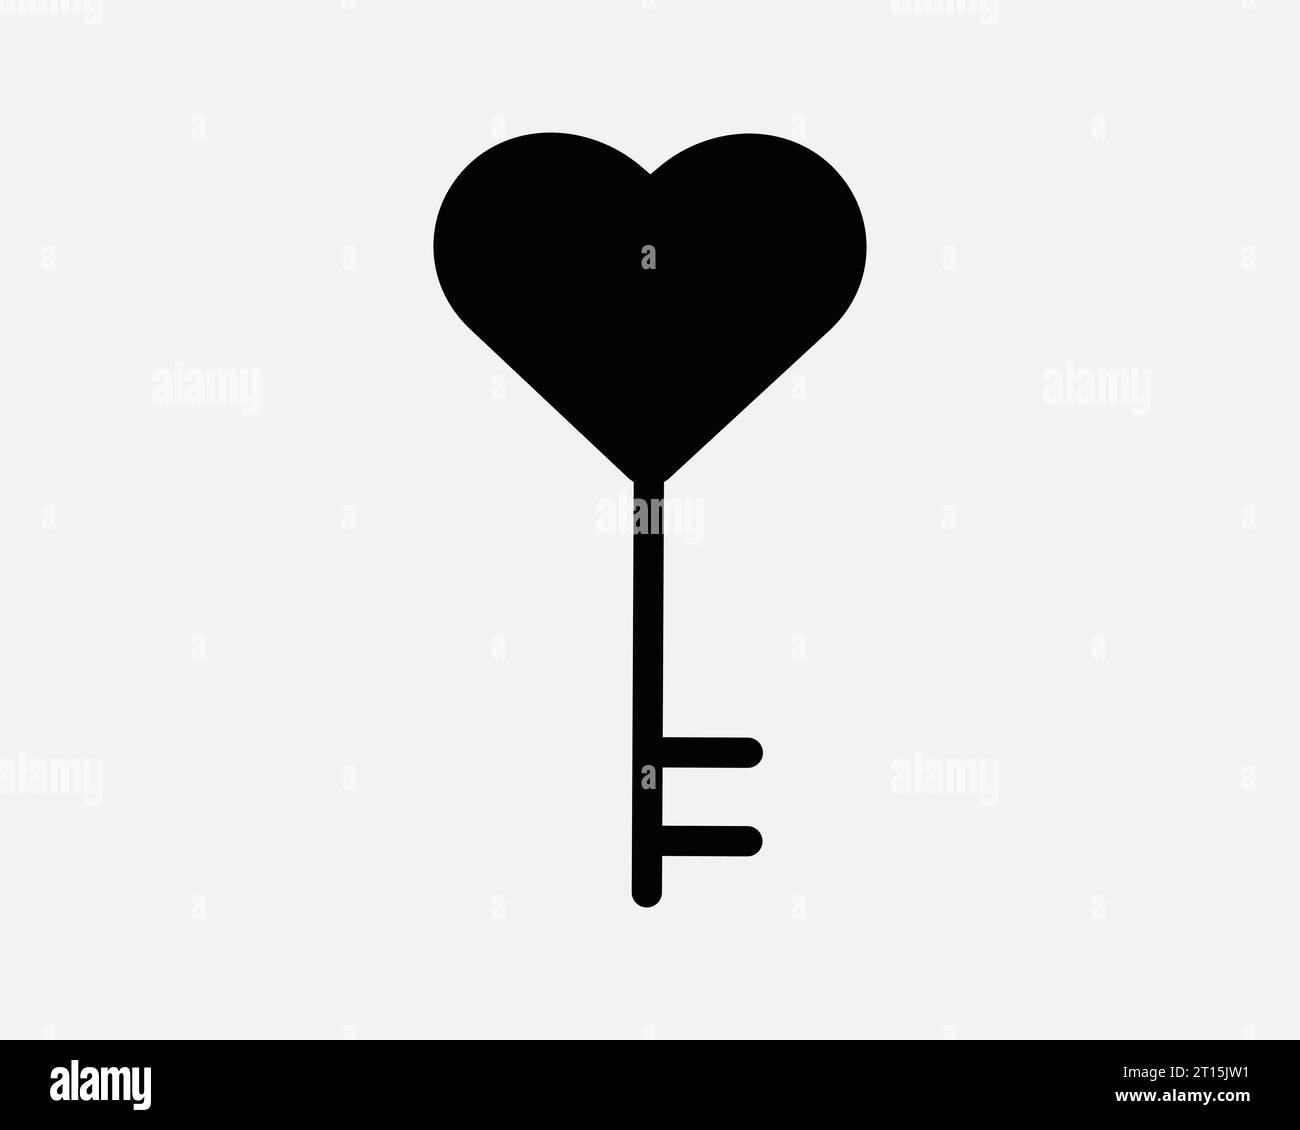 Heart Key Icon Sign Symbol EPS Vector Love Shape Lock Security Safety Illustration Image Graphic Stock Vector